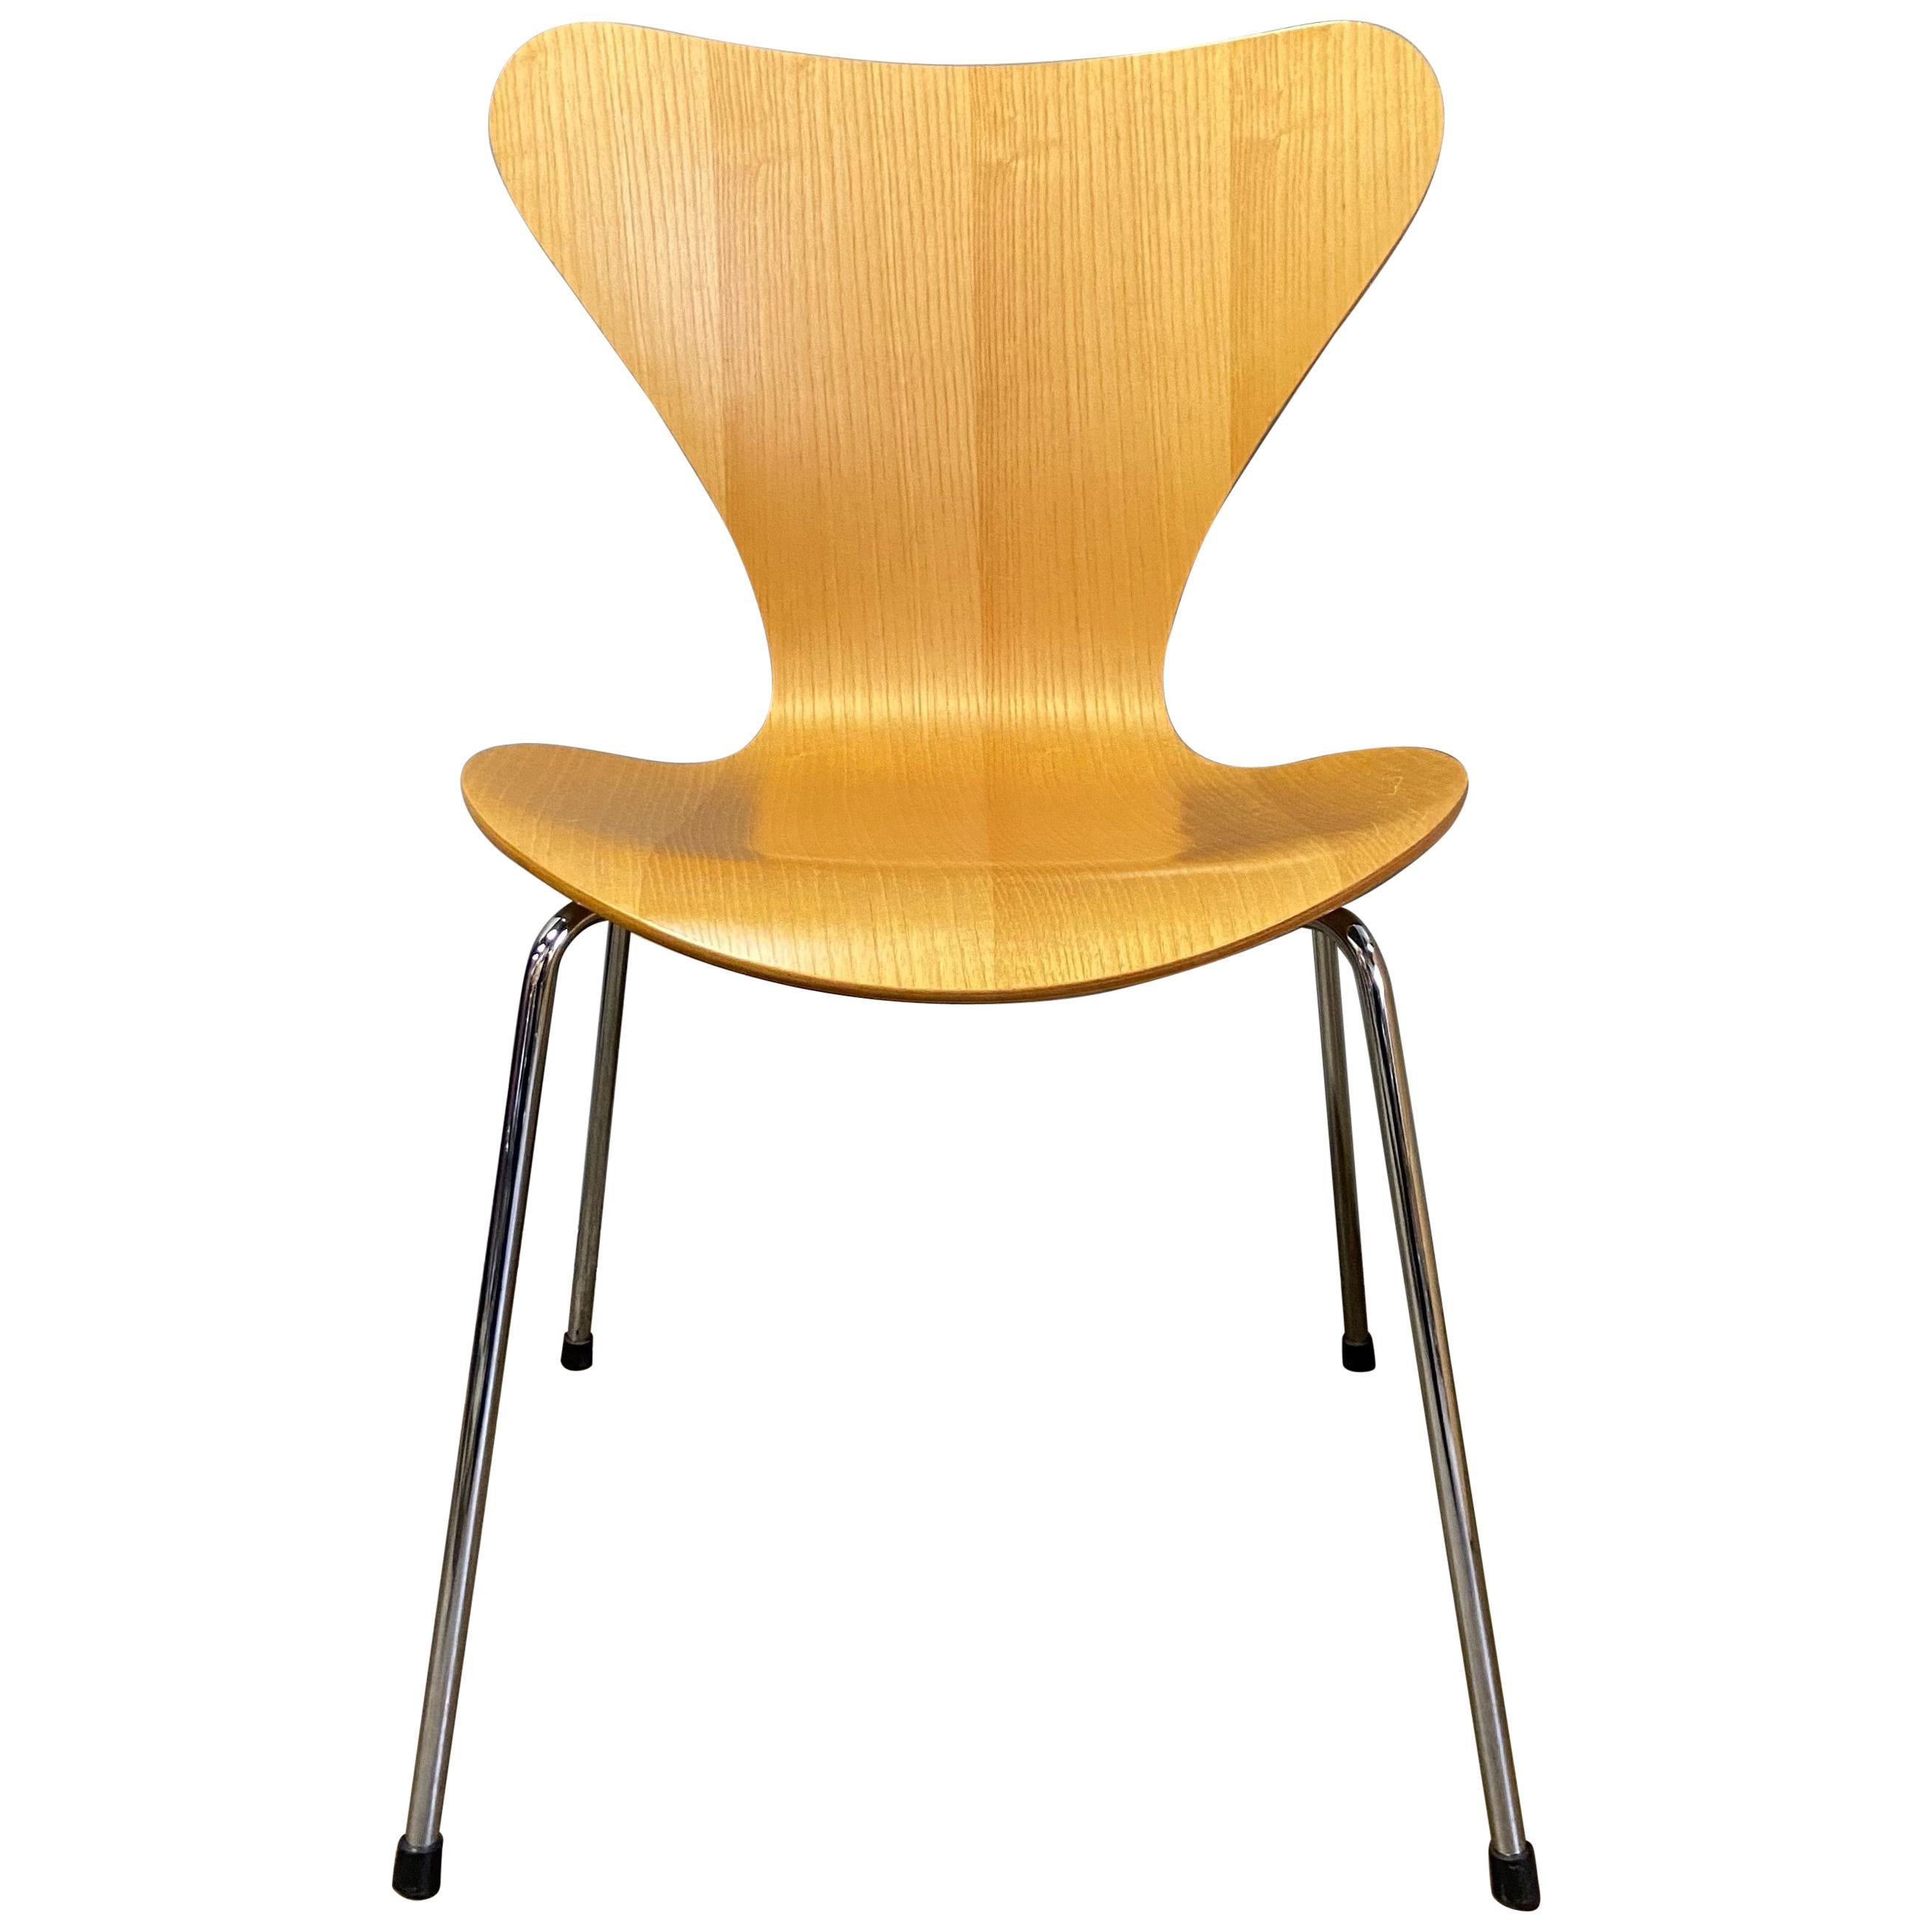 Midcentury Arne Jacobsen Series 7 Chairs For Sale 2